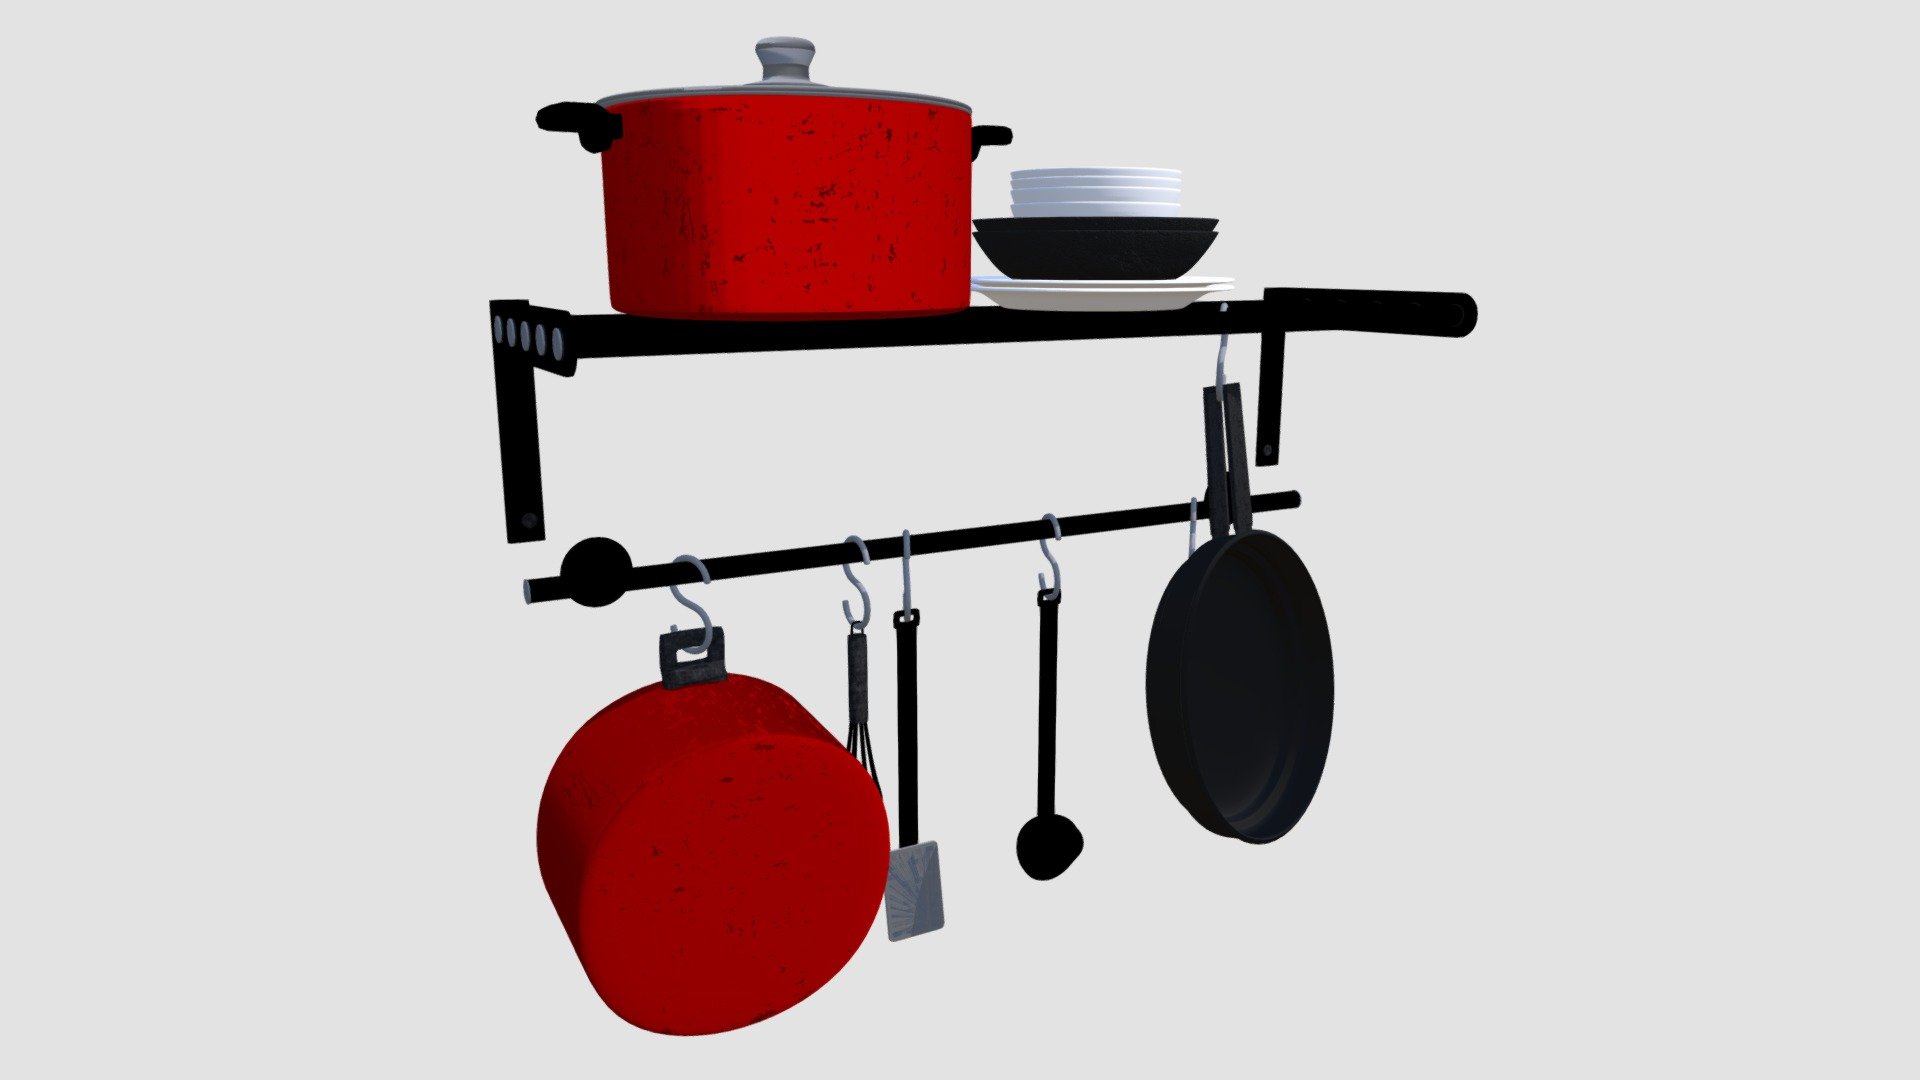 Highly detailed 3d model of retro kitchen utensils with all textures, shaders and materials. It is ready to use, just put it into your scene 3d model